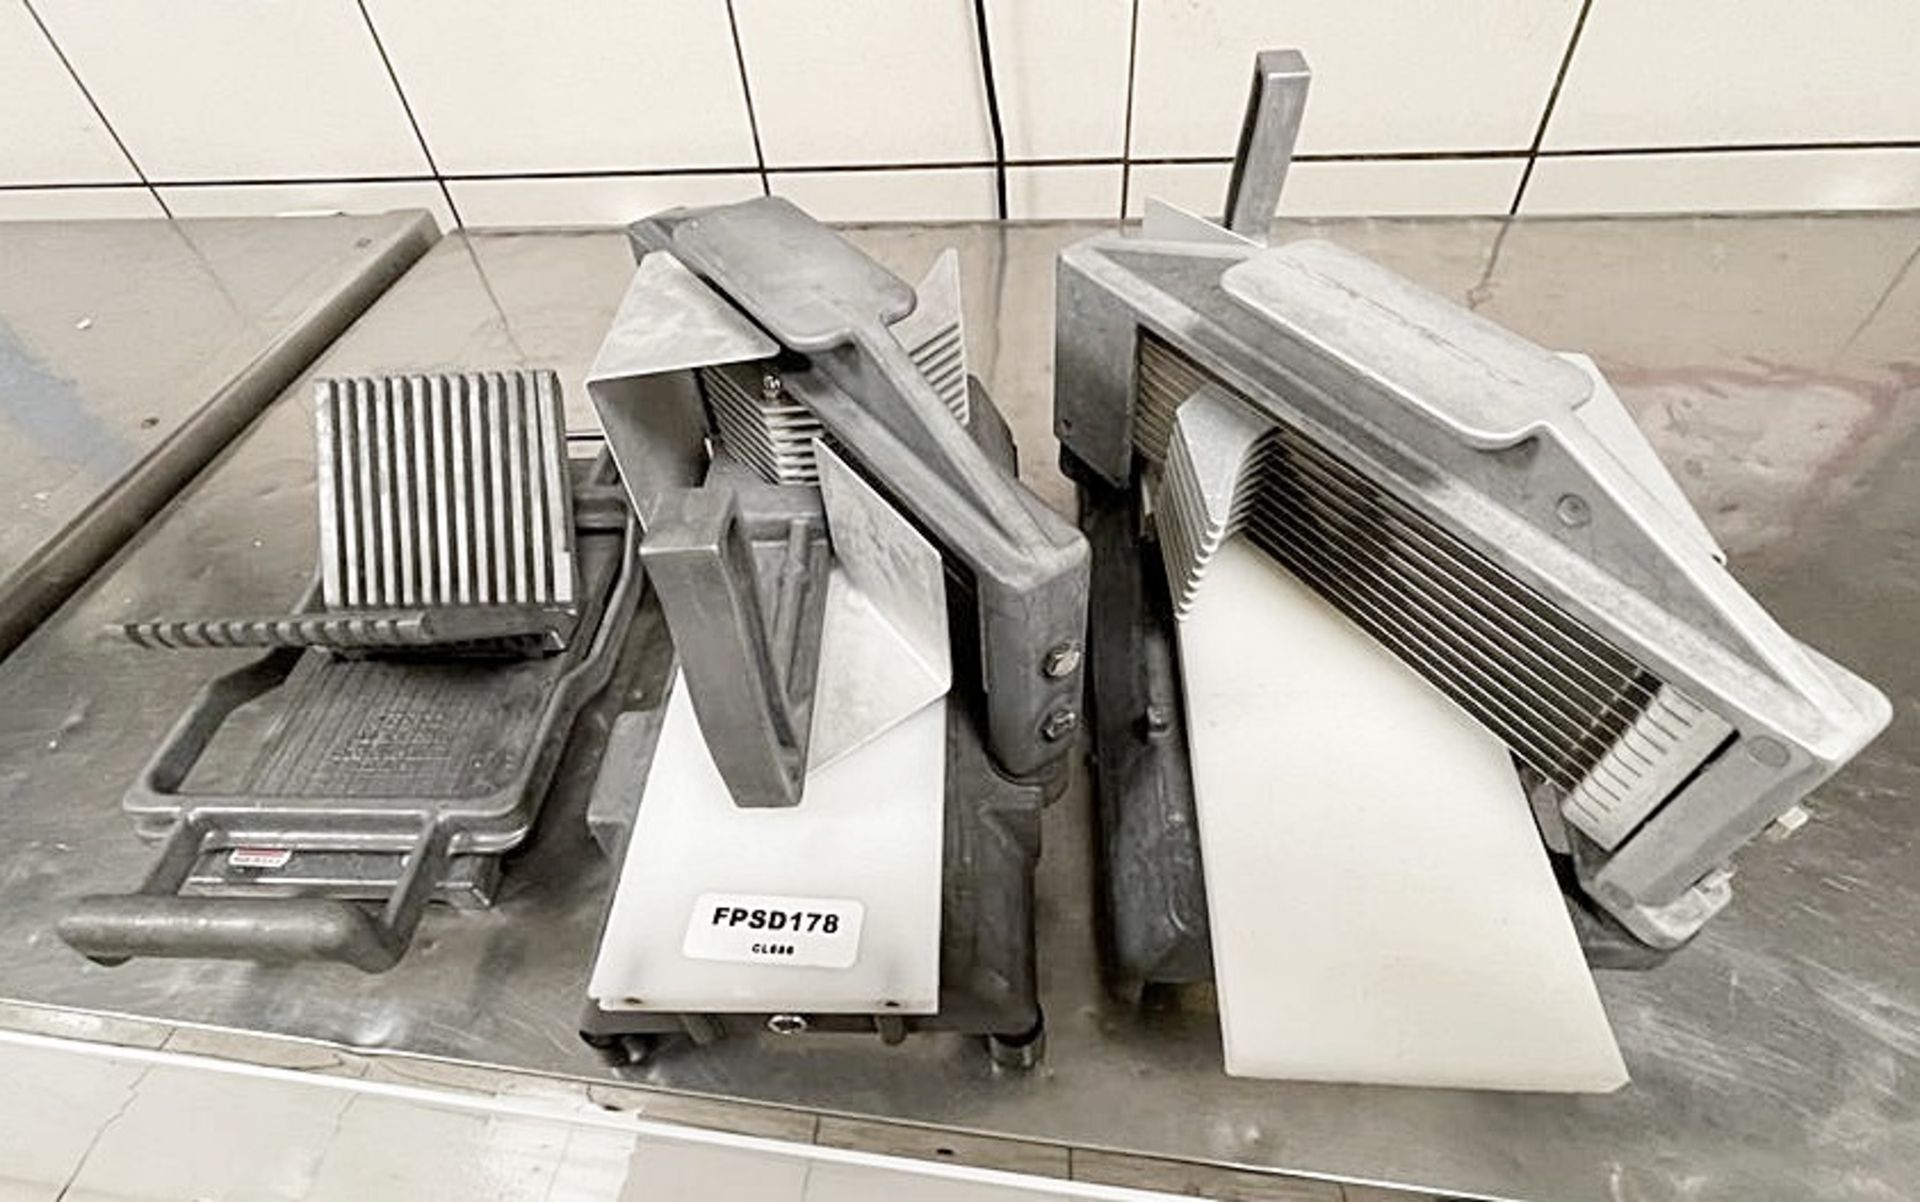 3 x Assorted Commercial Vegitable Slicers / Choppers - More Information To Follow - Ref: FPSD178 -